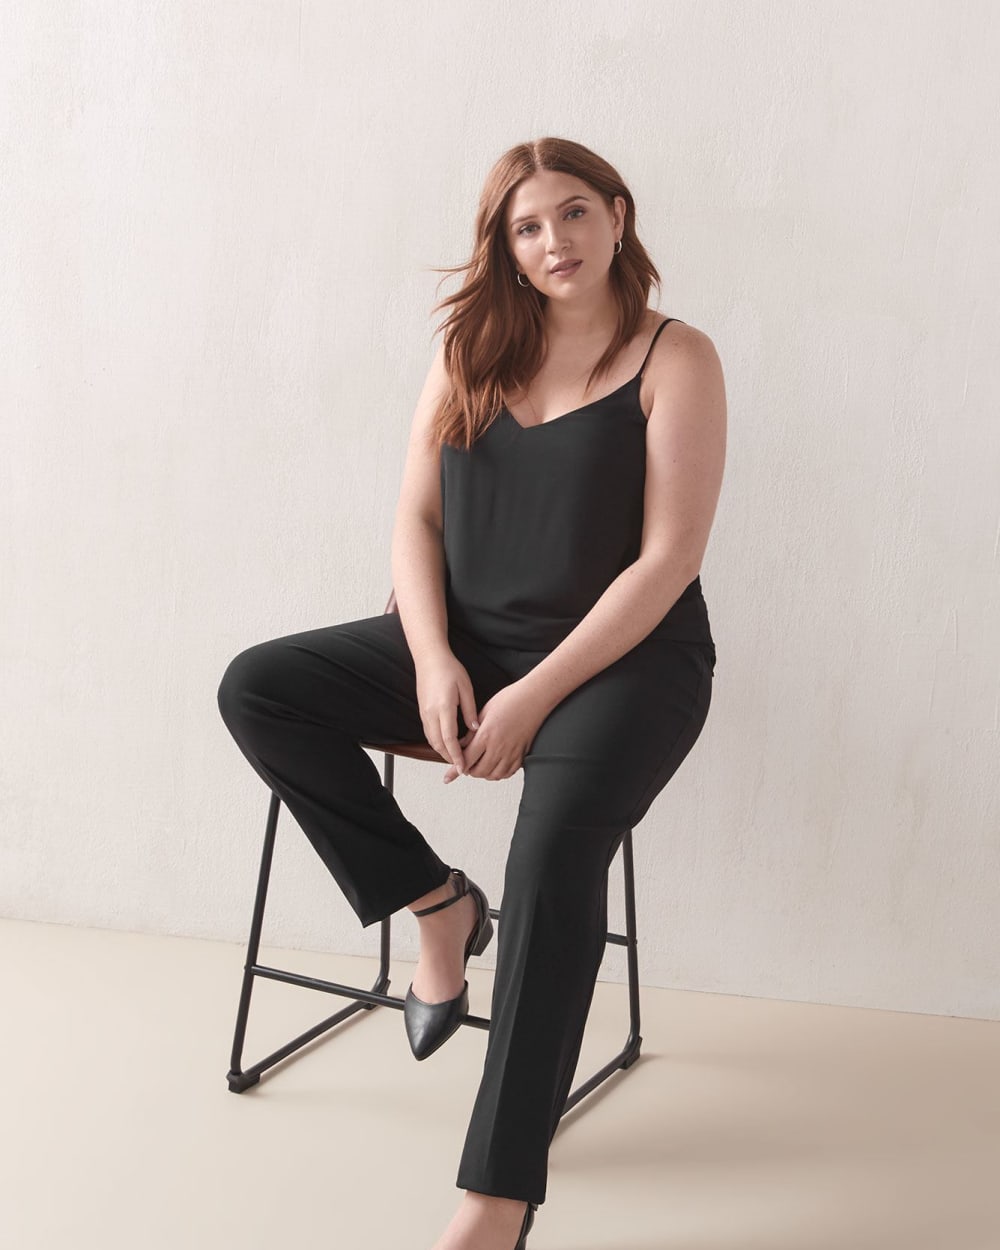 Savvy, Black Straight-Leg Pant - In Every Story